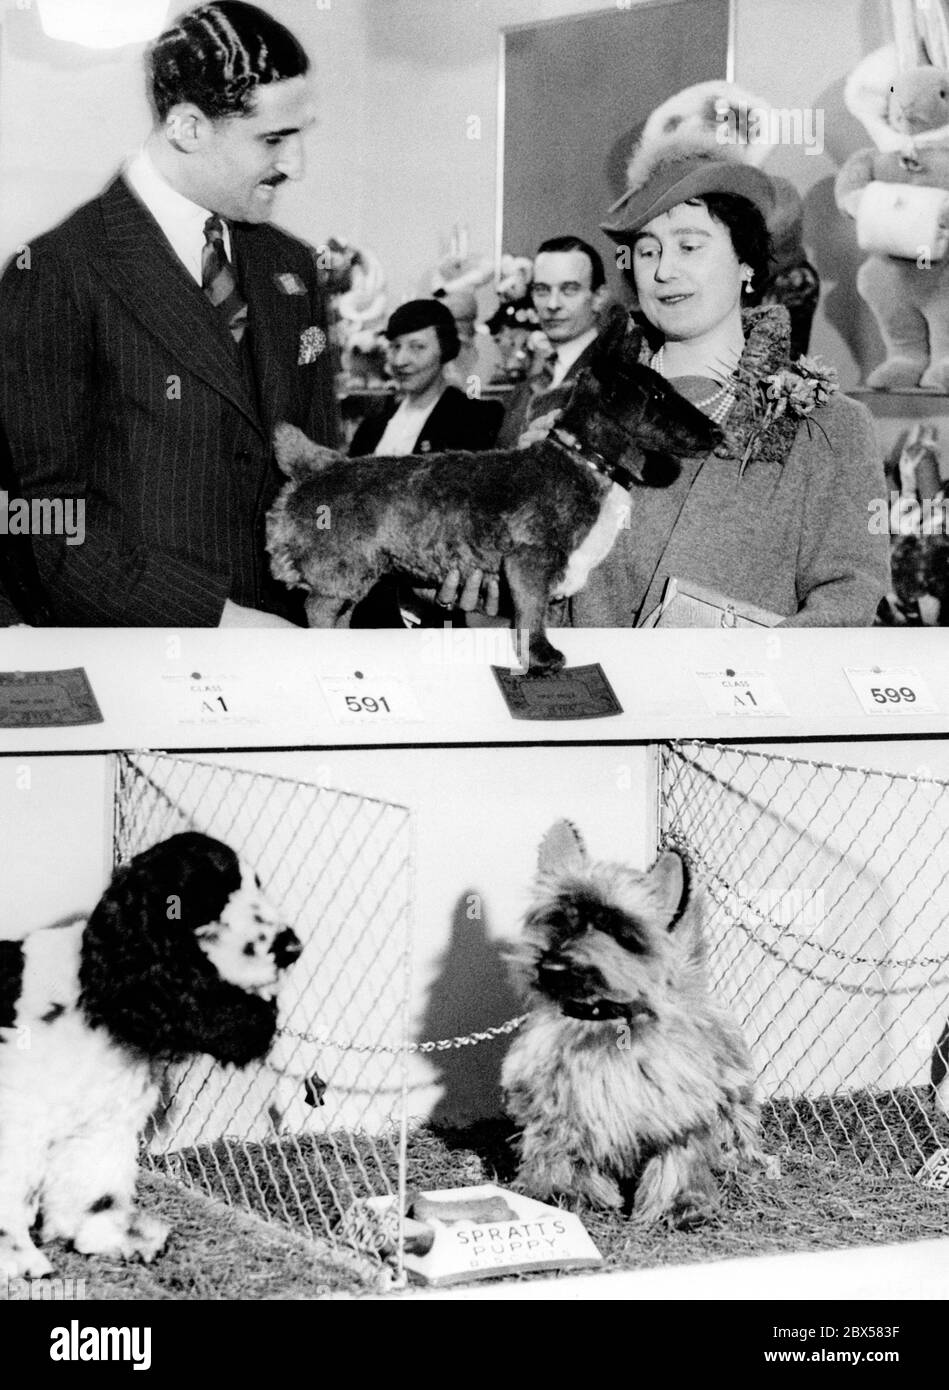 Queen Elizabeth inspects a toy dog of the breed Corgi at 'Toy Crufts' at the Olympics section of the British Industries Fair. Stock Photo